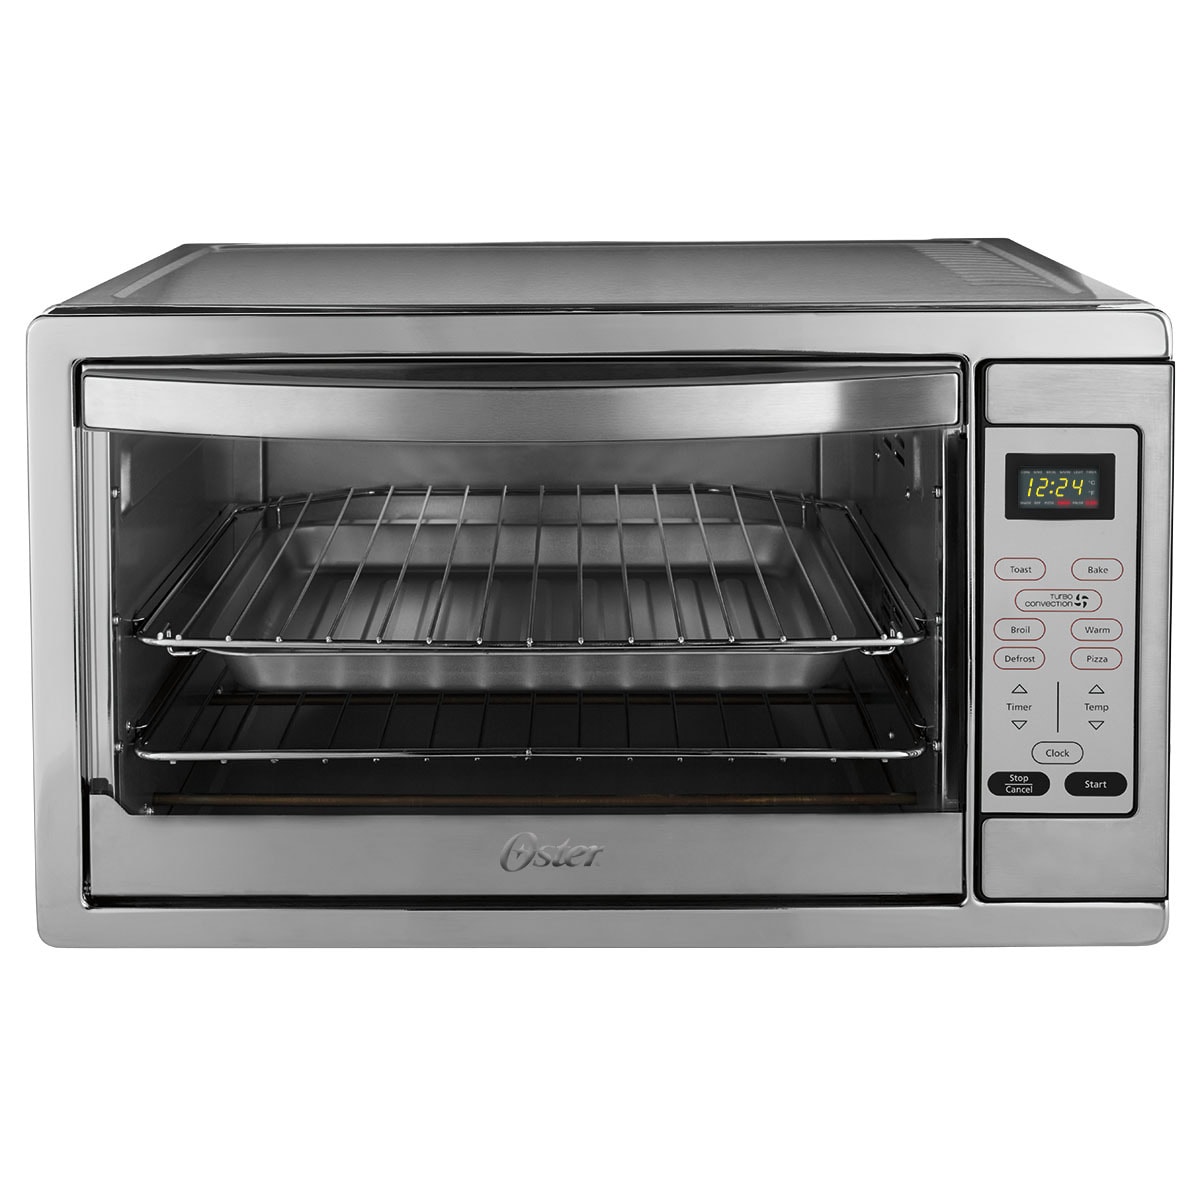 Oster 14-Slice Gray/Silver Convection Toaster Oven (1500-Watt) in